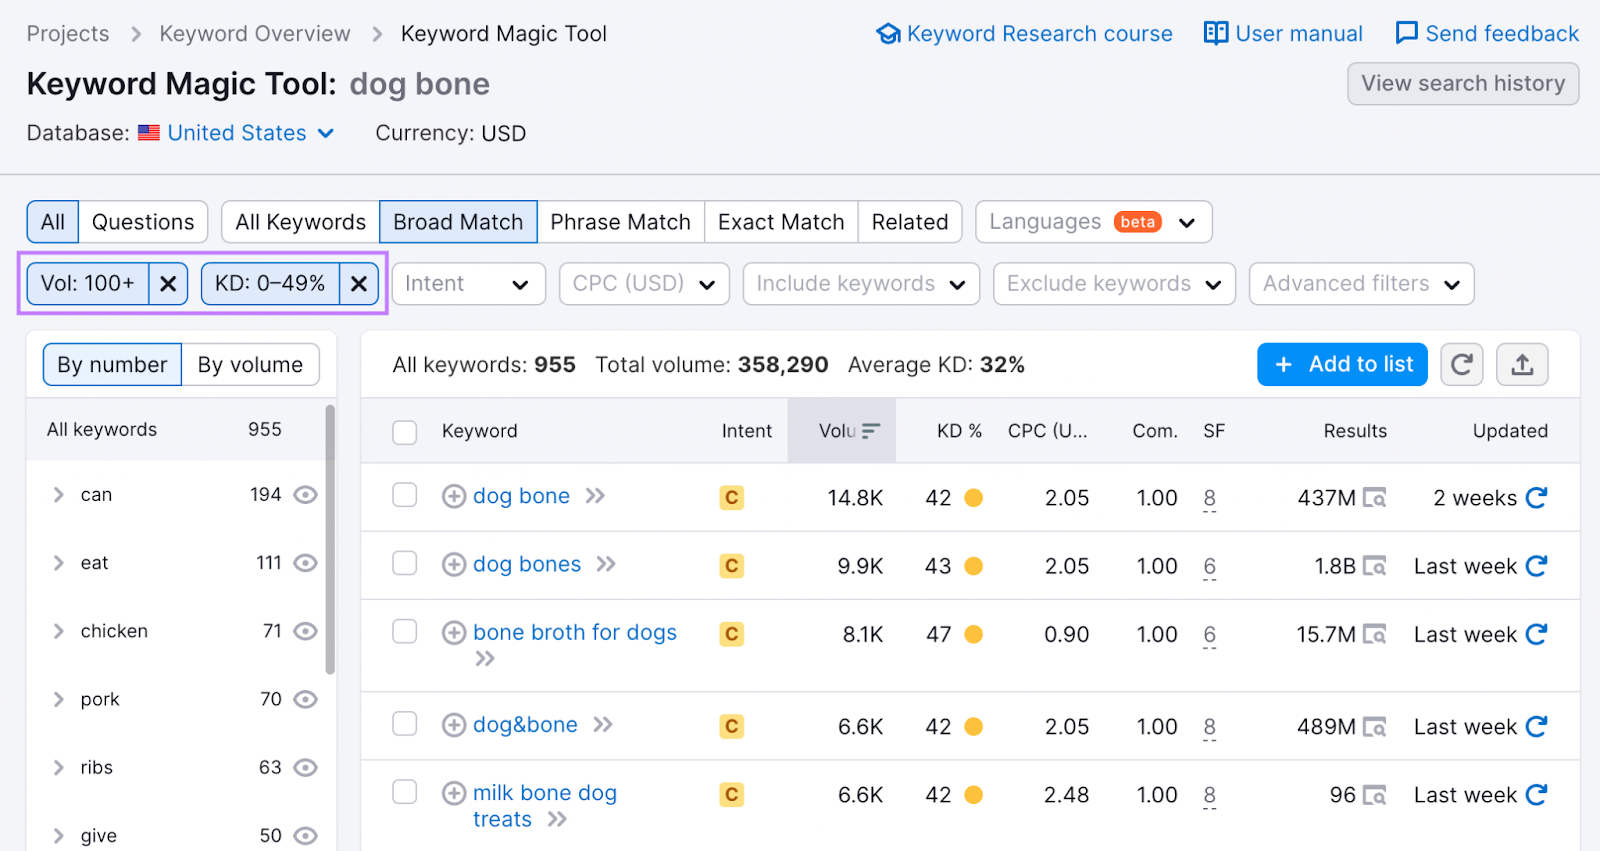 Keyword Magic Tool results for "dog bone" with "Volume" and "KD%" filters applied